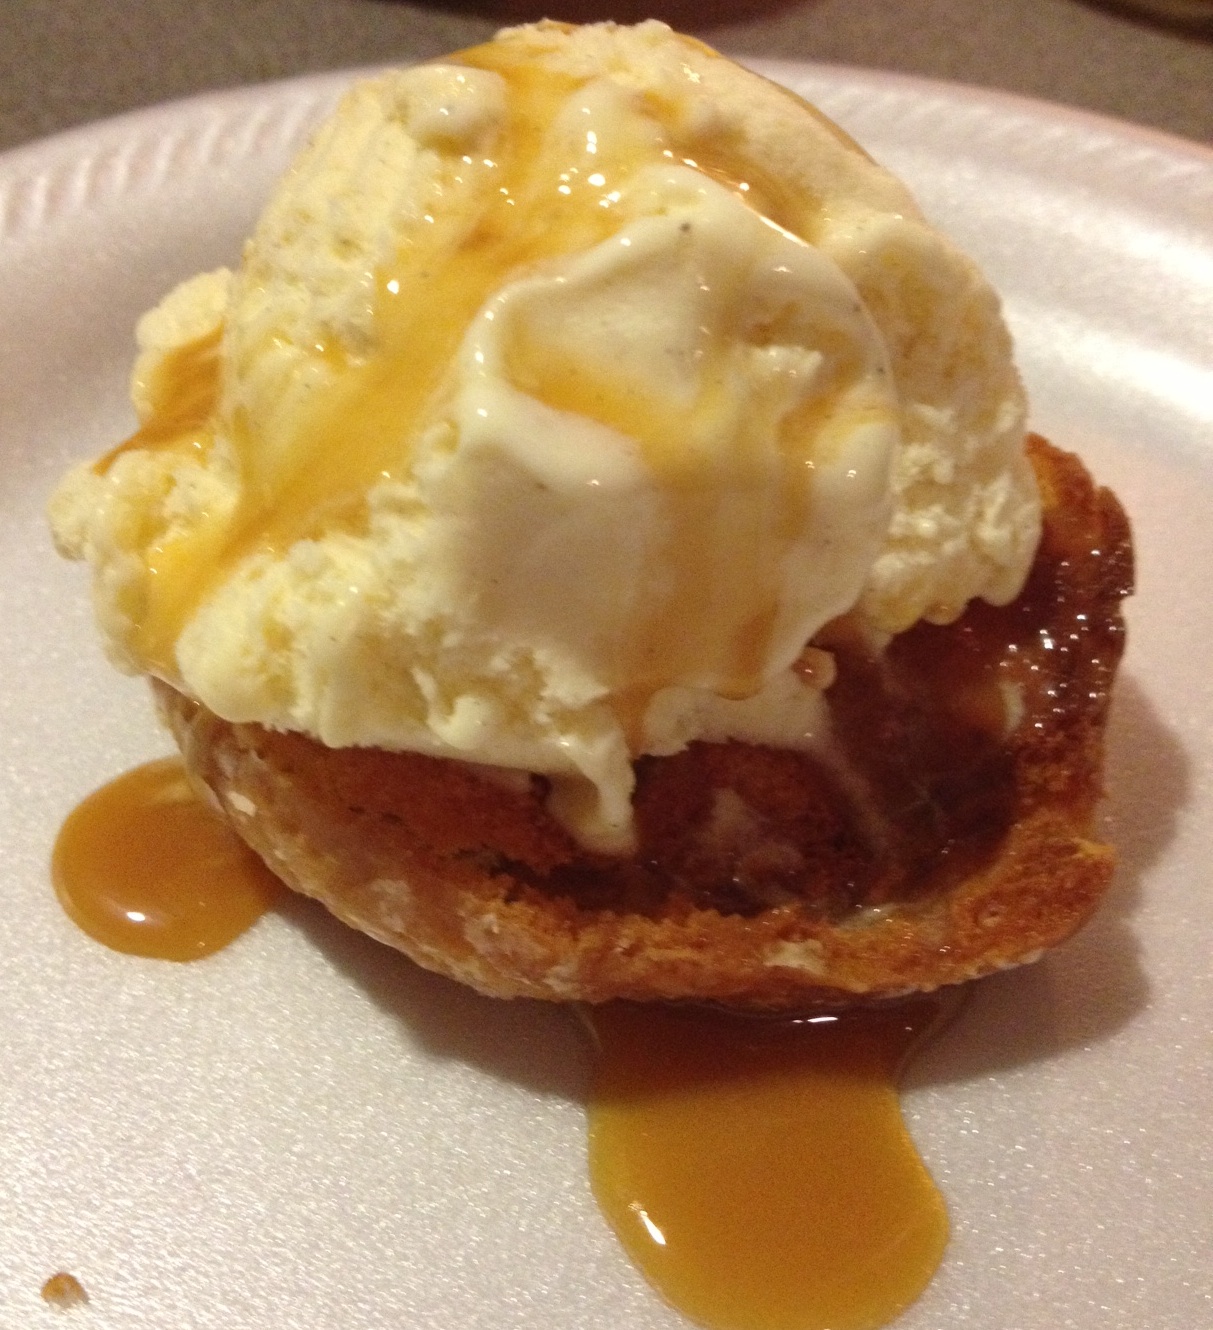 Check out our recipe for grilled donuts with ice cream.